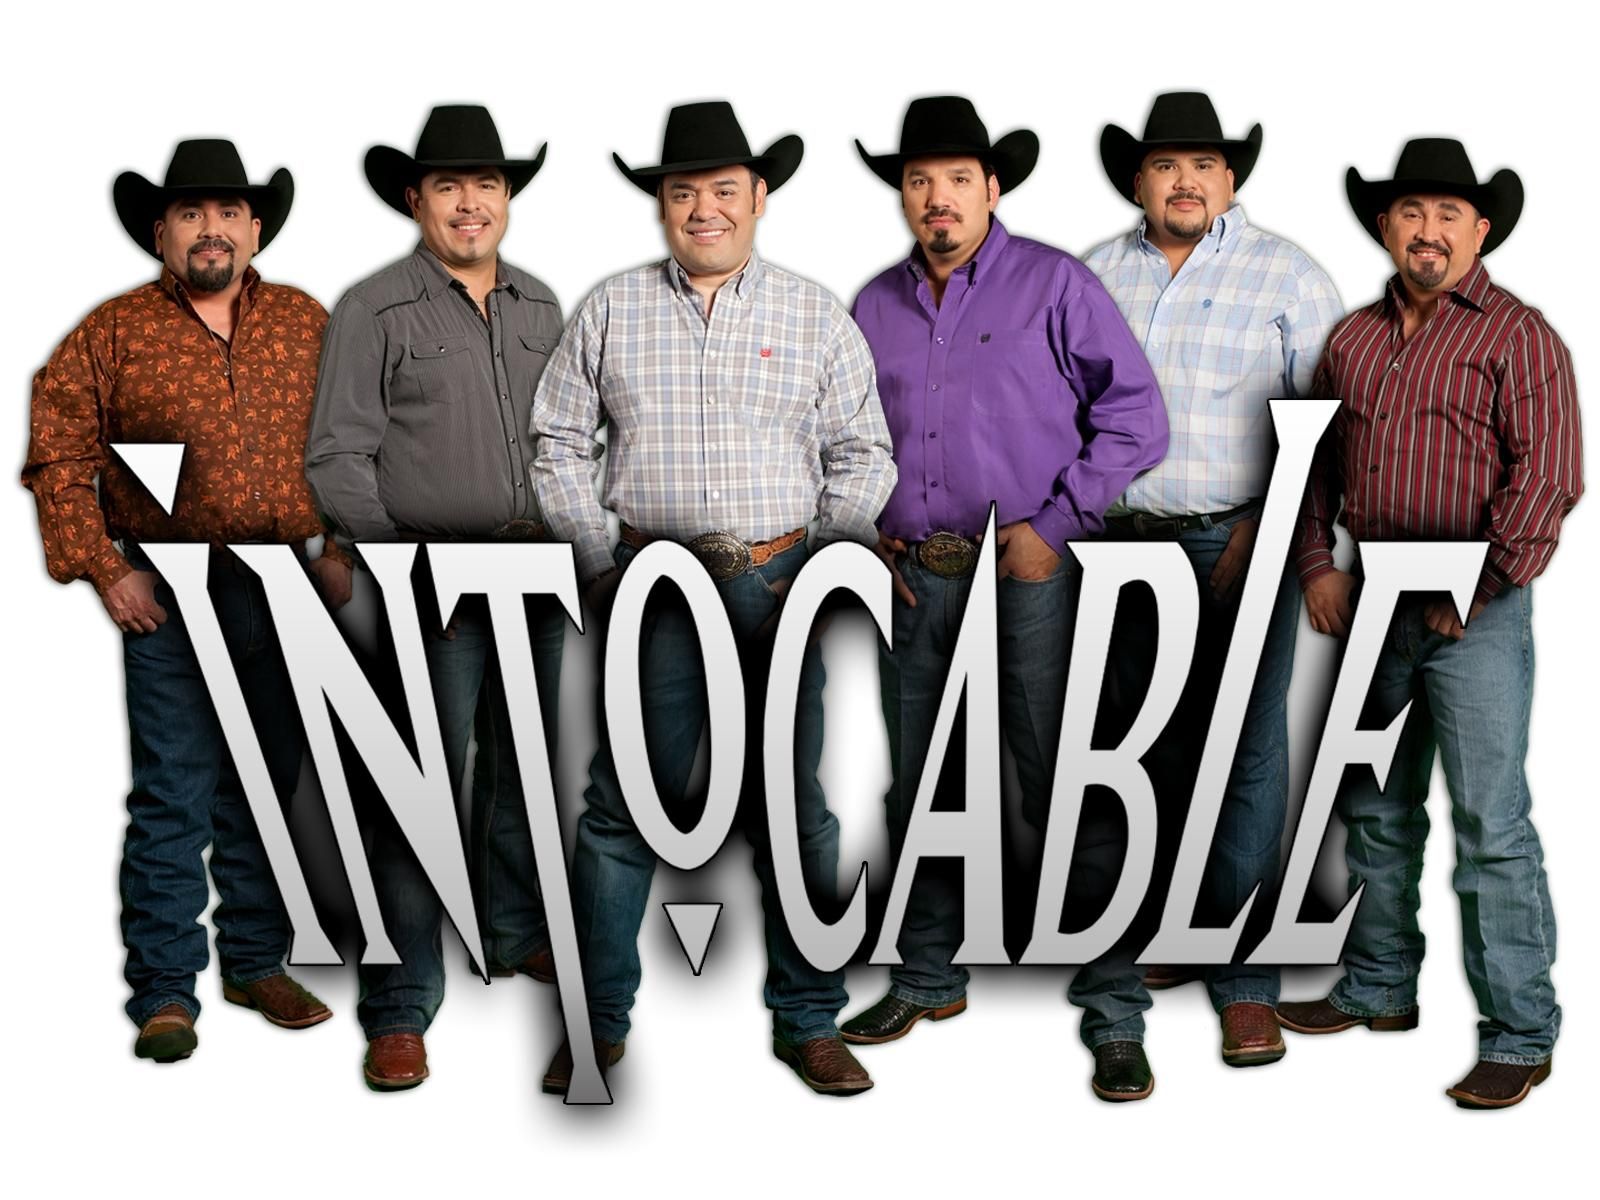 Jalapeño Festival will feature Intocable, Duelo